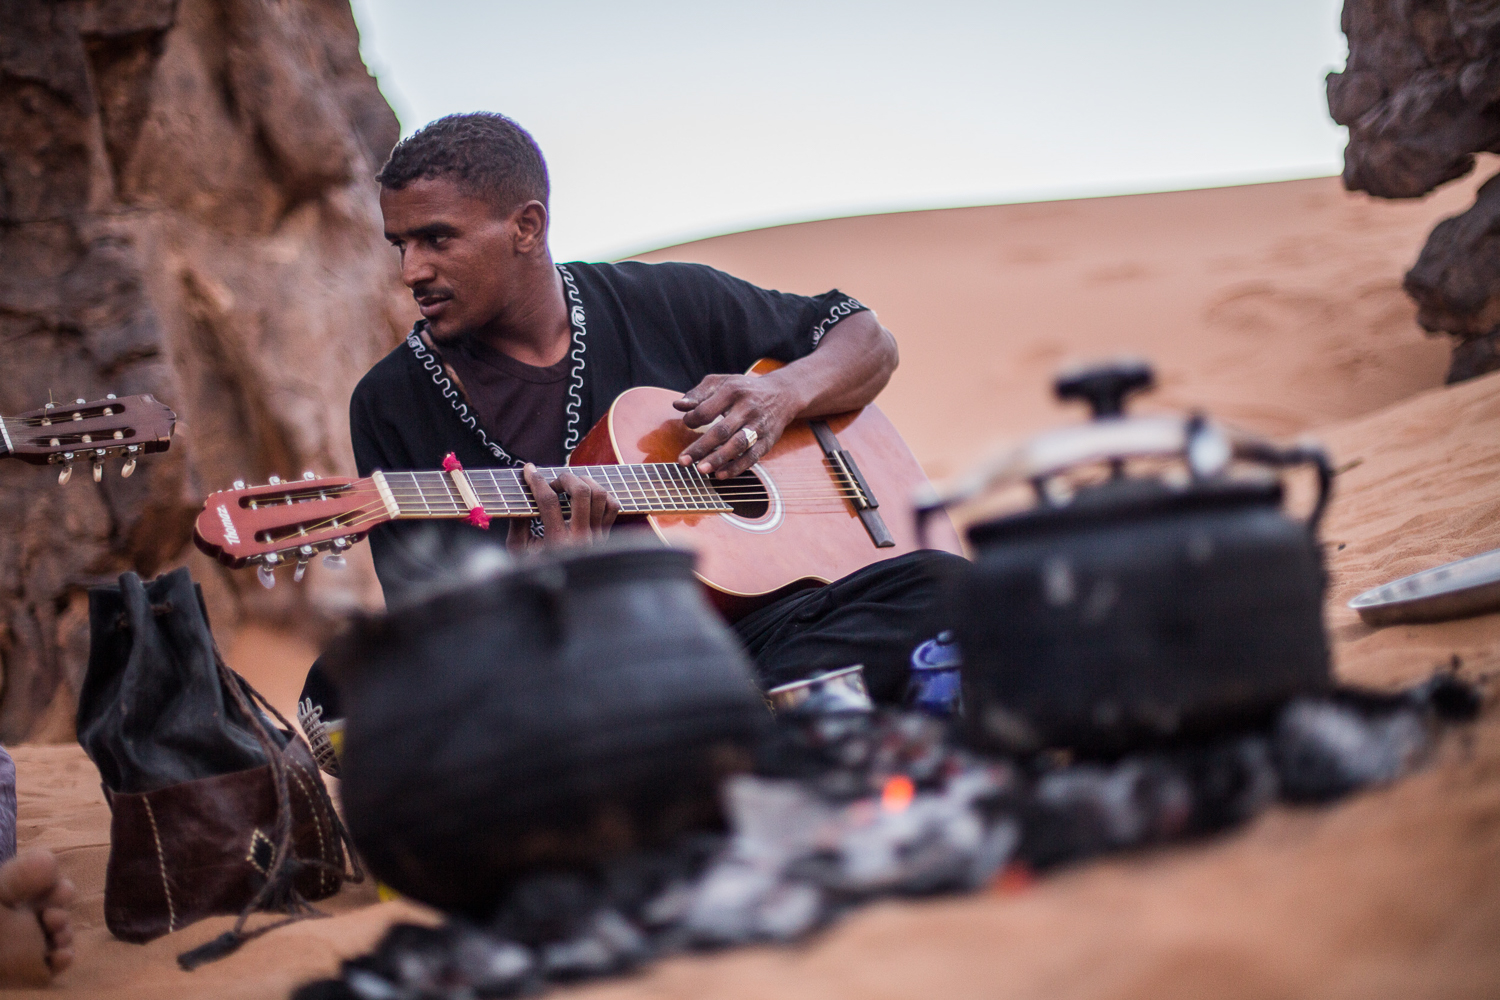 A group of young Tuareg travel here often to sit under the stars, drink tea and play guitar [Mauricio Morales/Al Jazeera]